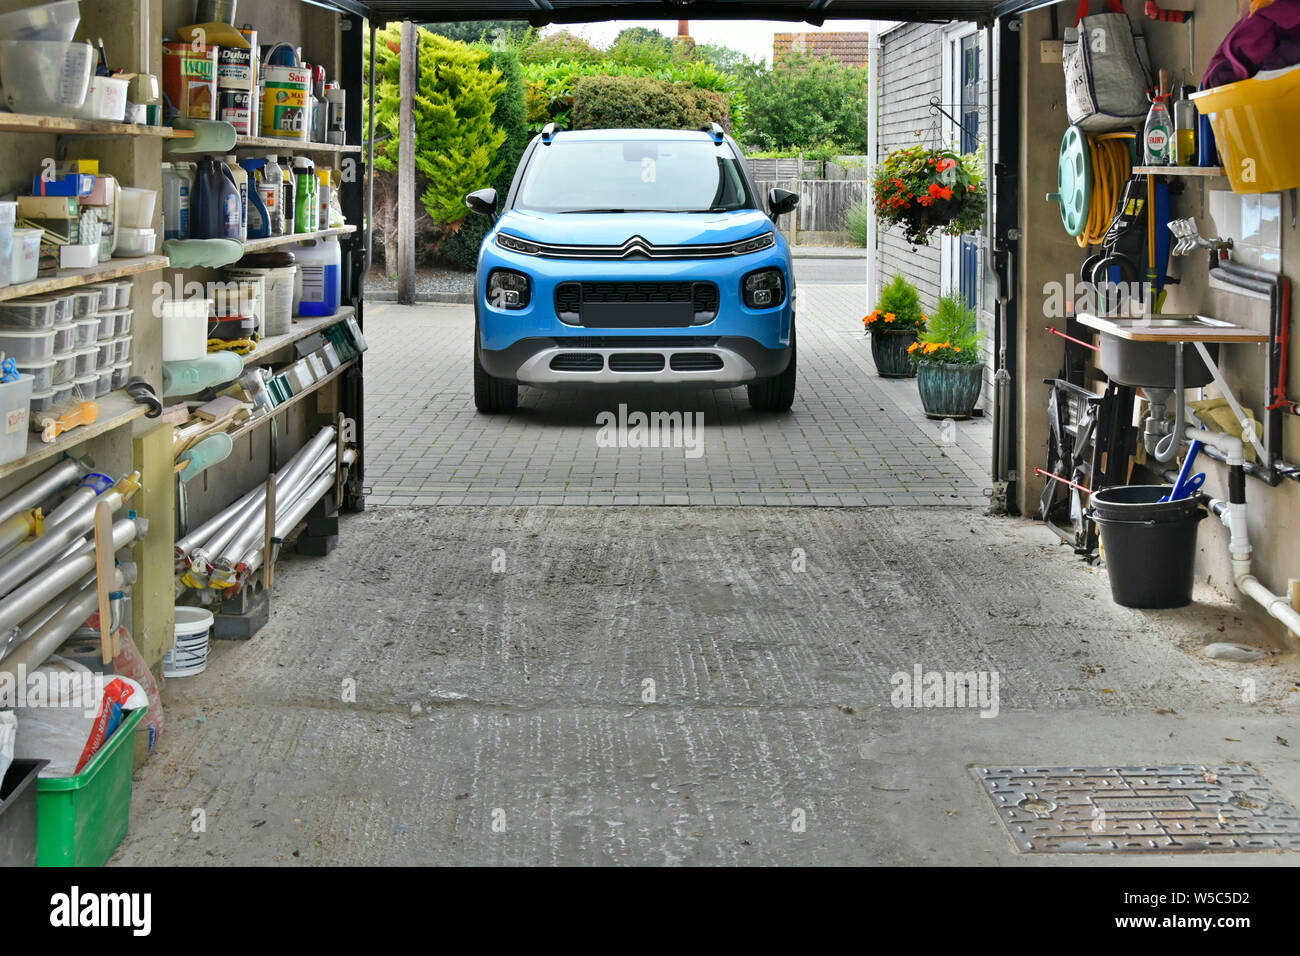 Citroen Aircross C3 SUV & driveway garage attached to house used for car & household storage of home paraphernalia tools & garden chemicals England UK Stock Photo